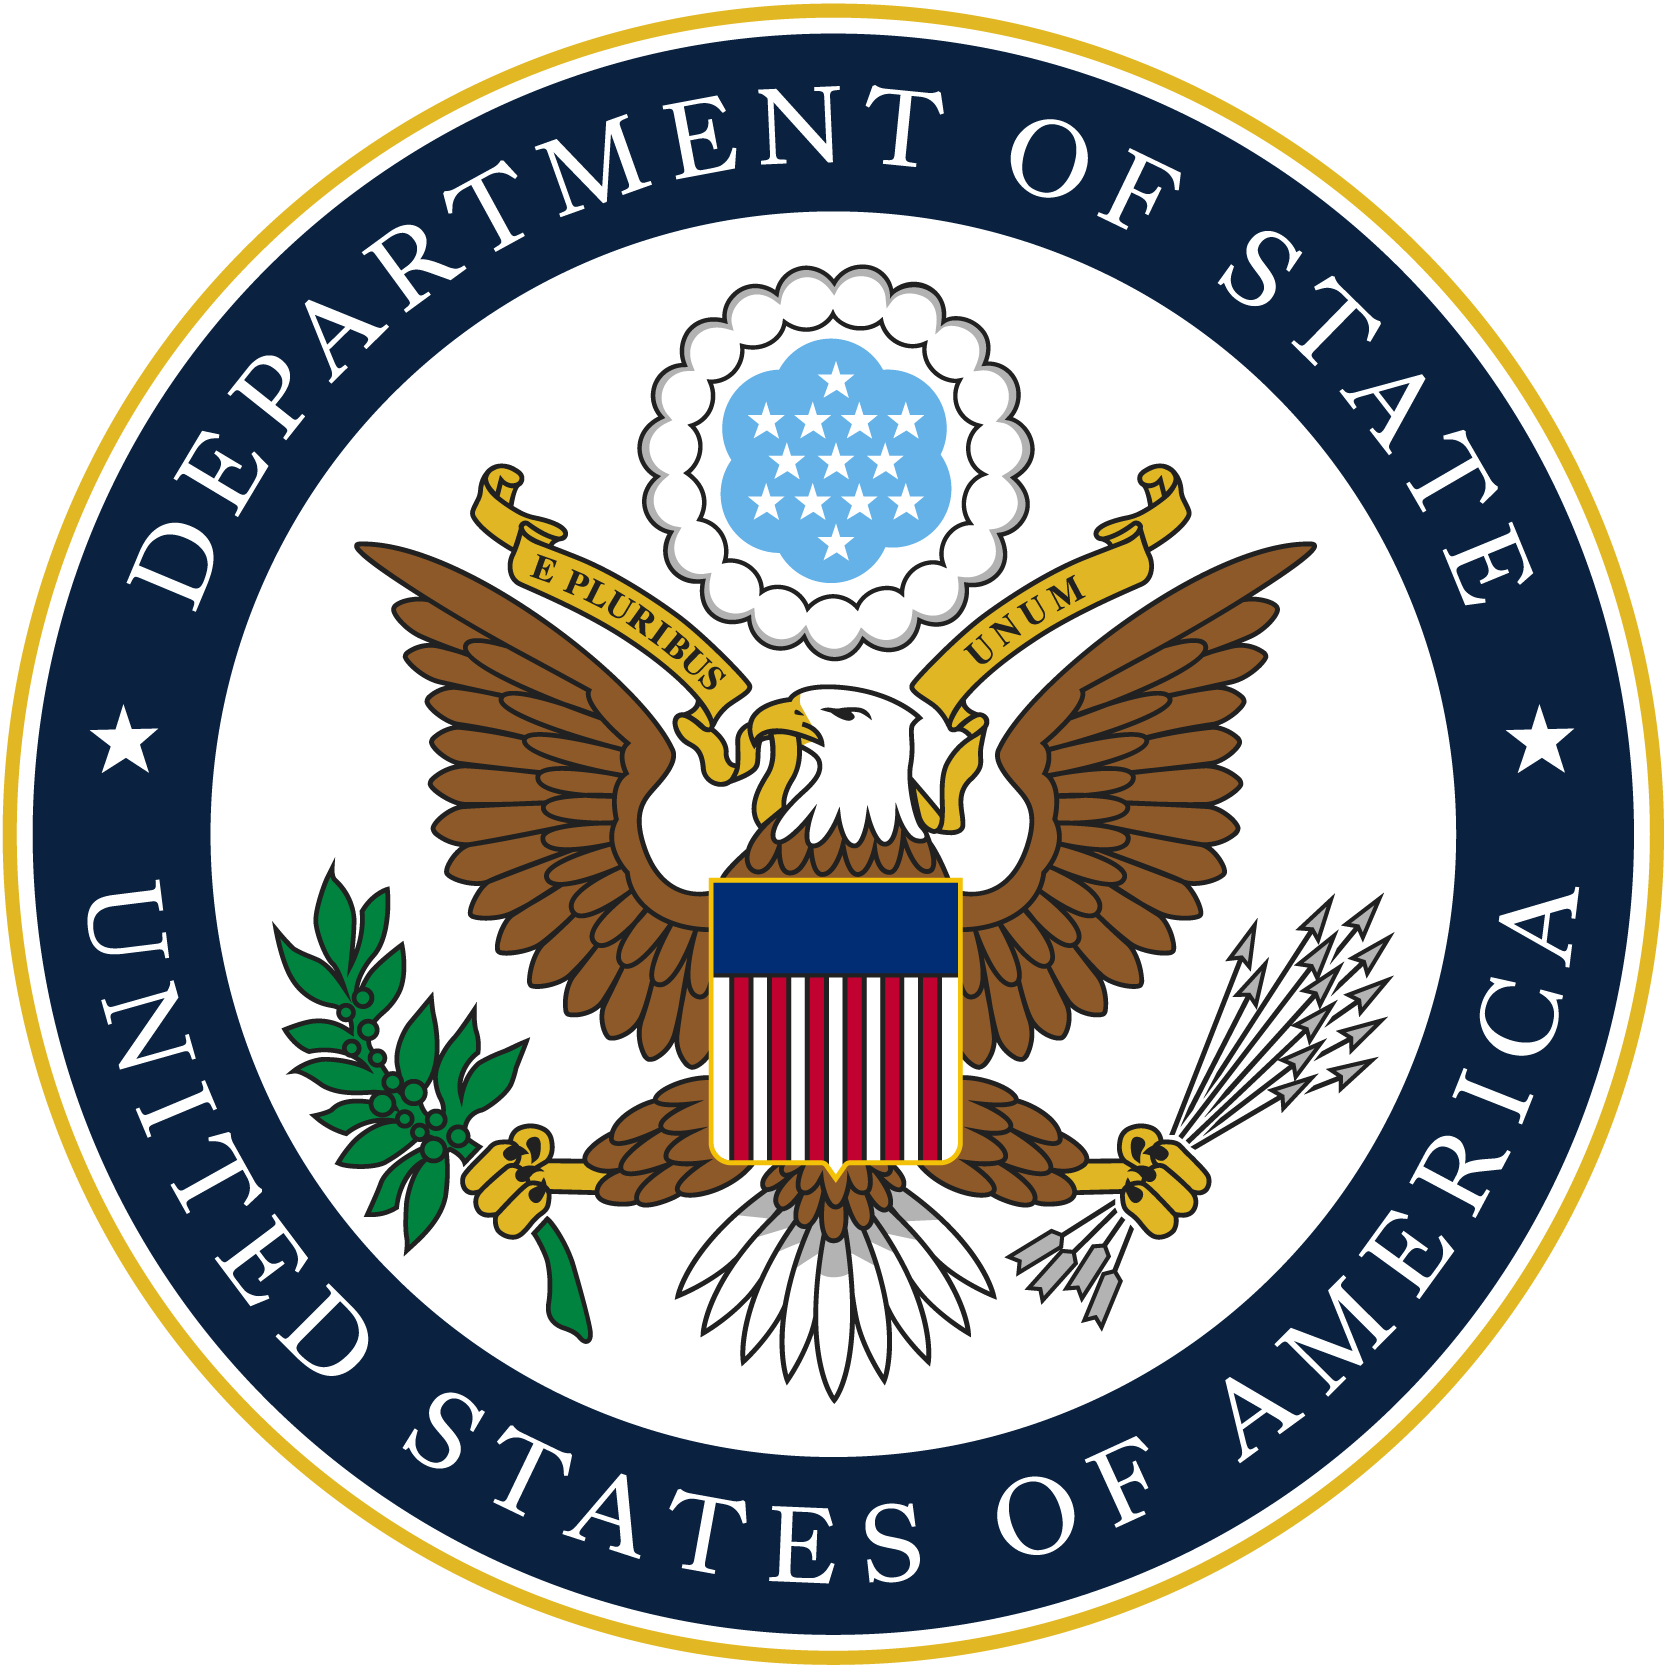 Department of State - United States of America